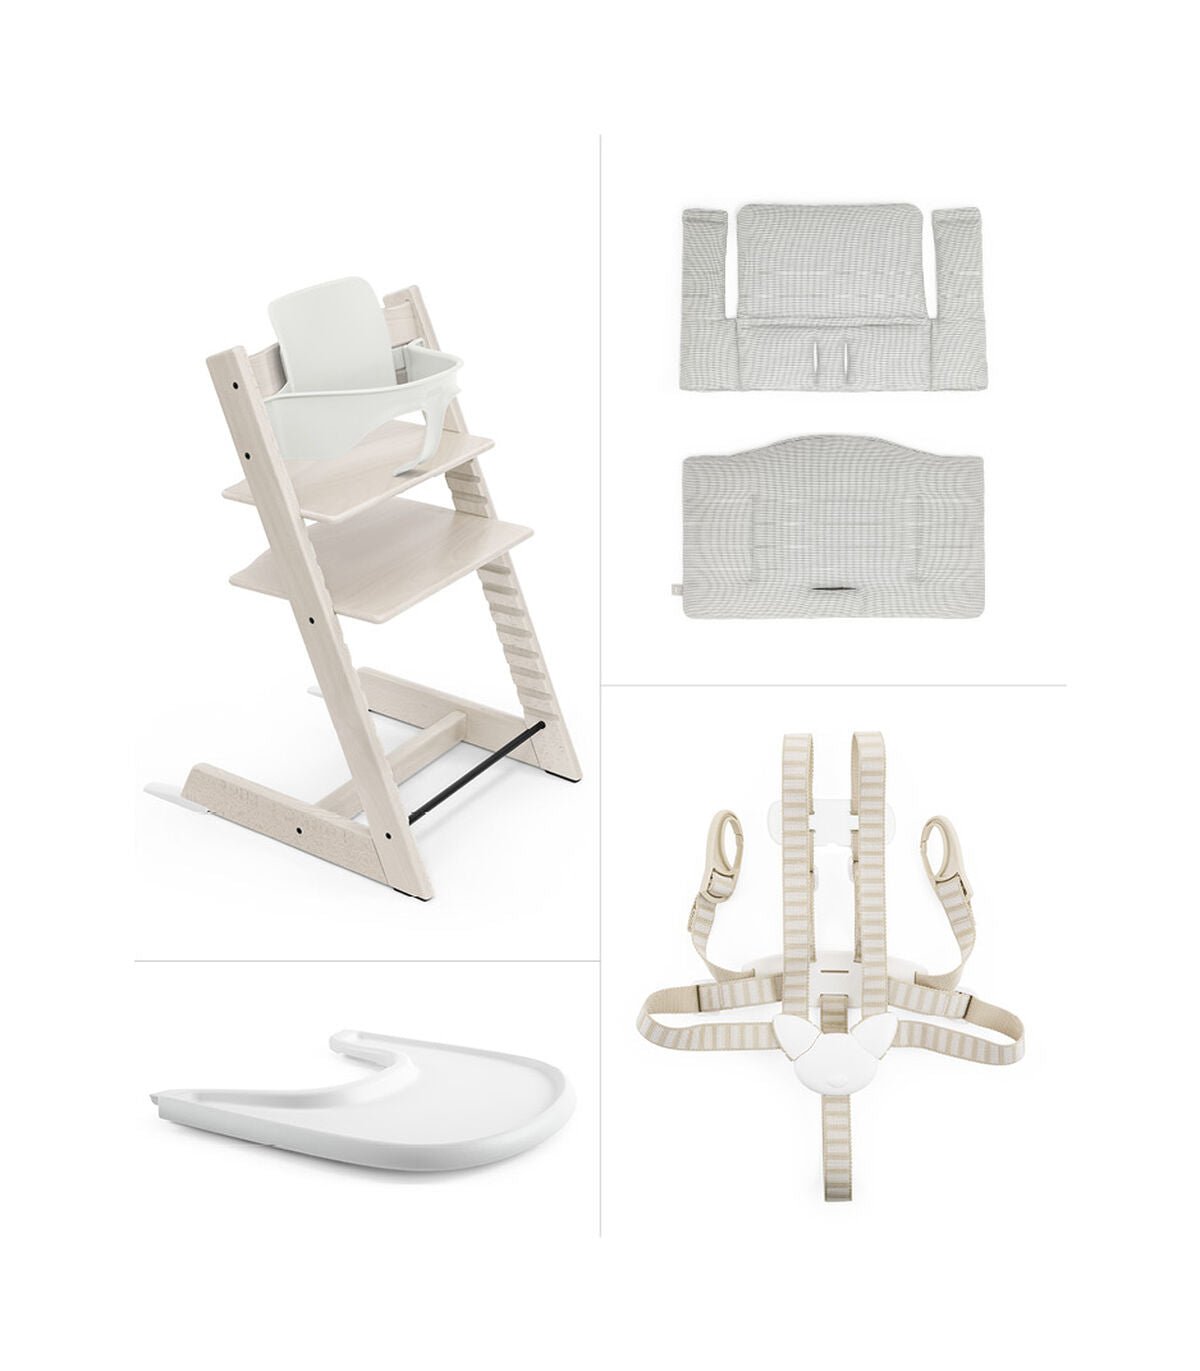 Stokke Tripp Trapp High Chair Complete With Cushion And Tray - ANB Baby -7040356389001$300 - $500